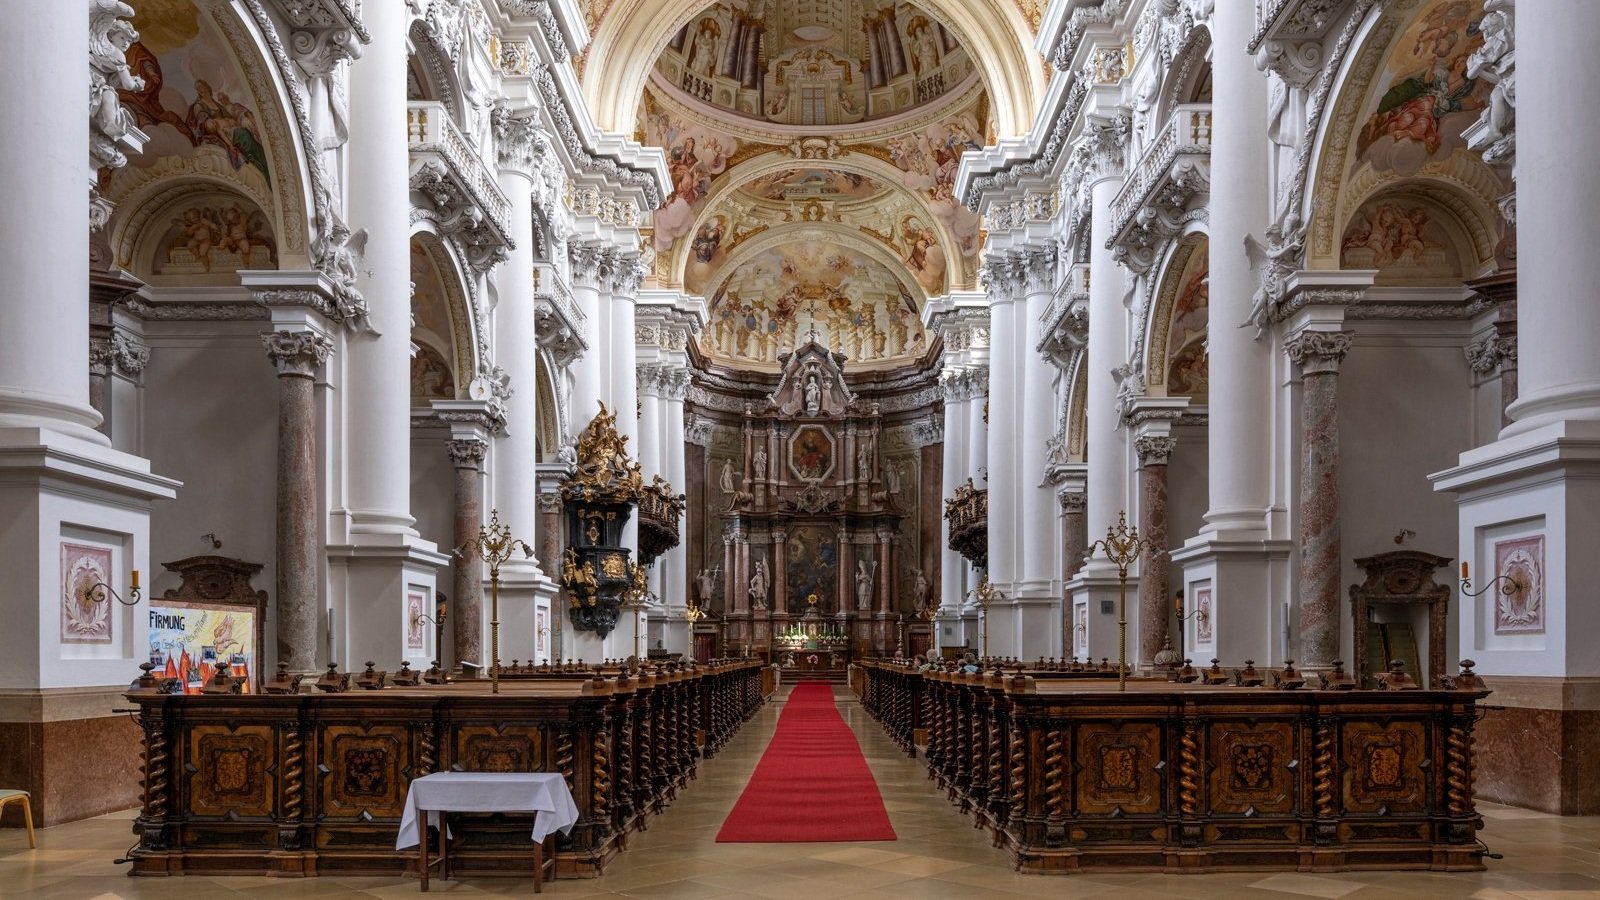 The Monastery of St Florian, indelibly associated with Bruckner